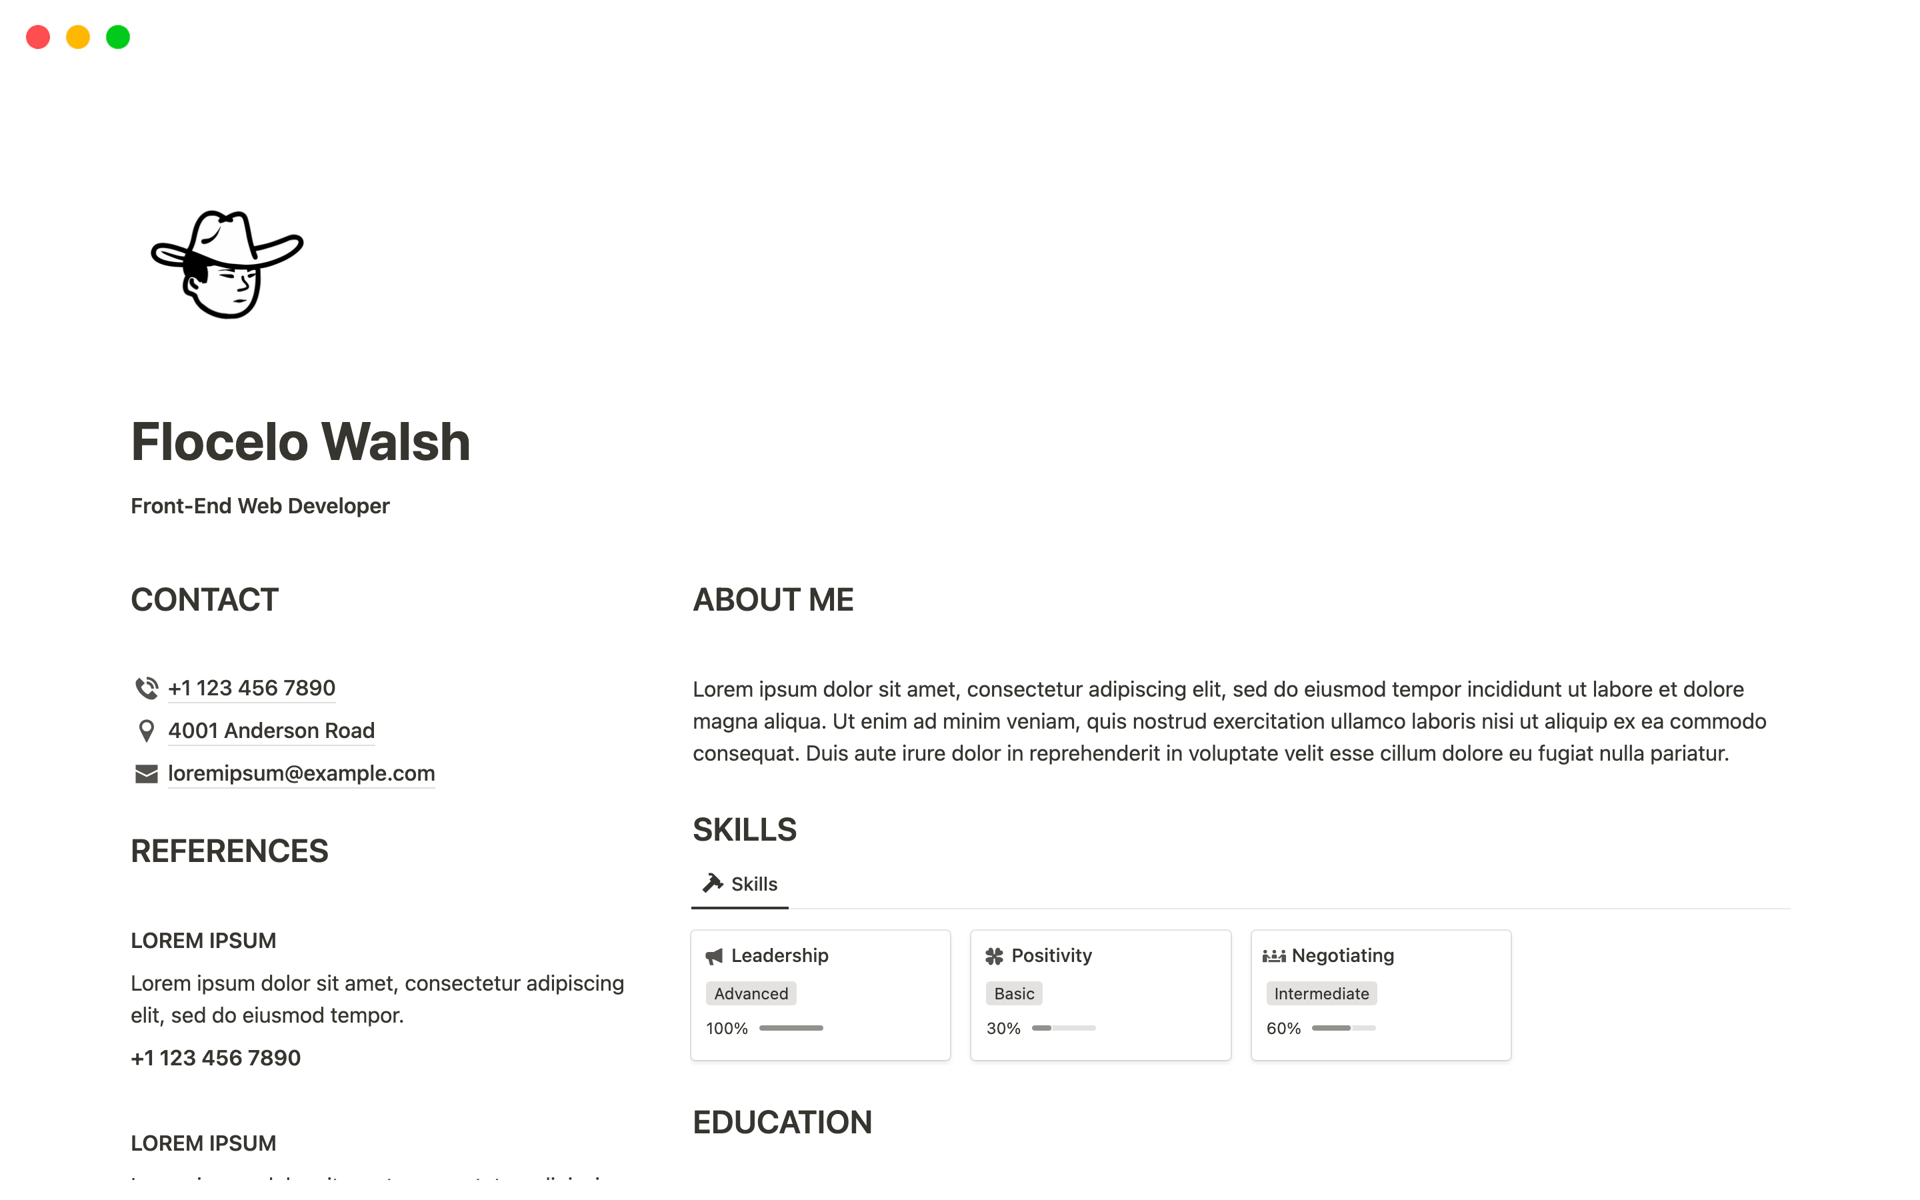 This template allows you to build a one-page Resume/CV on Notion.